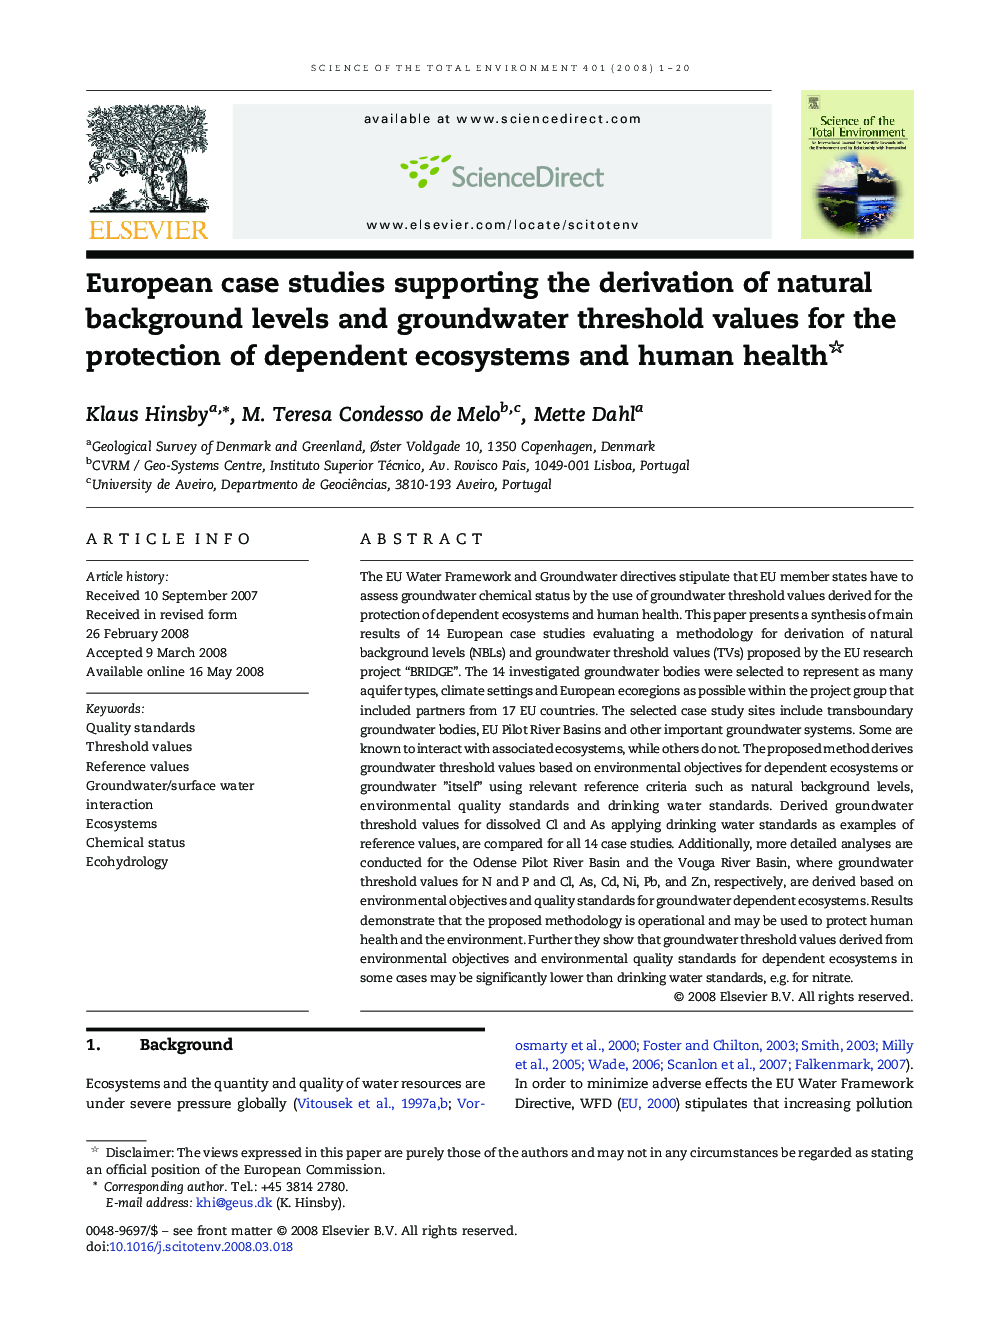 European case studies supporting the derivation of natural background levels and groundwater threshold values for the protection of dependent ecosystems and human health 